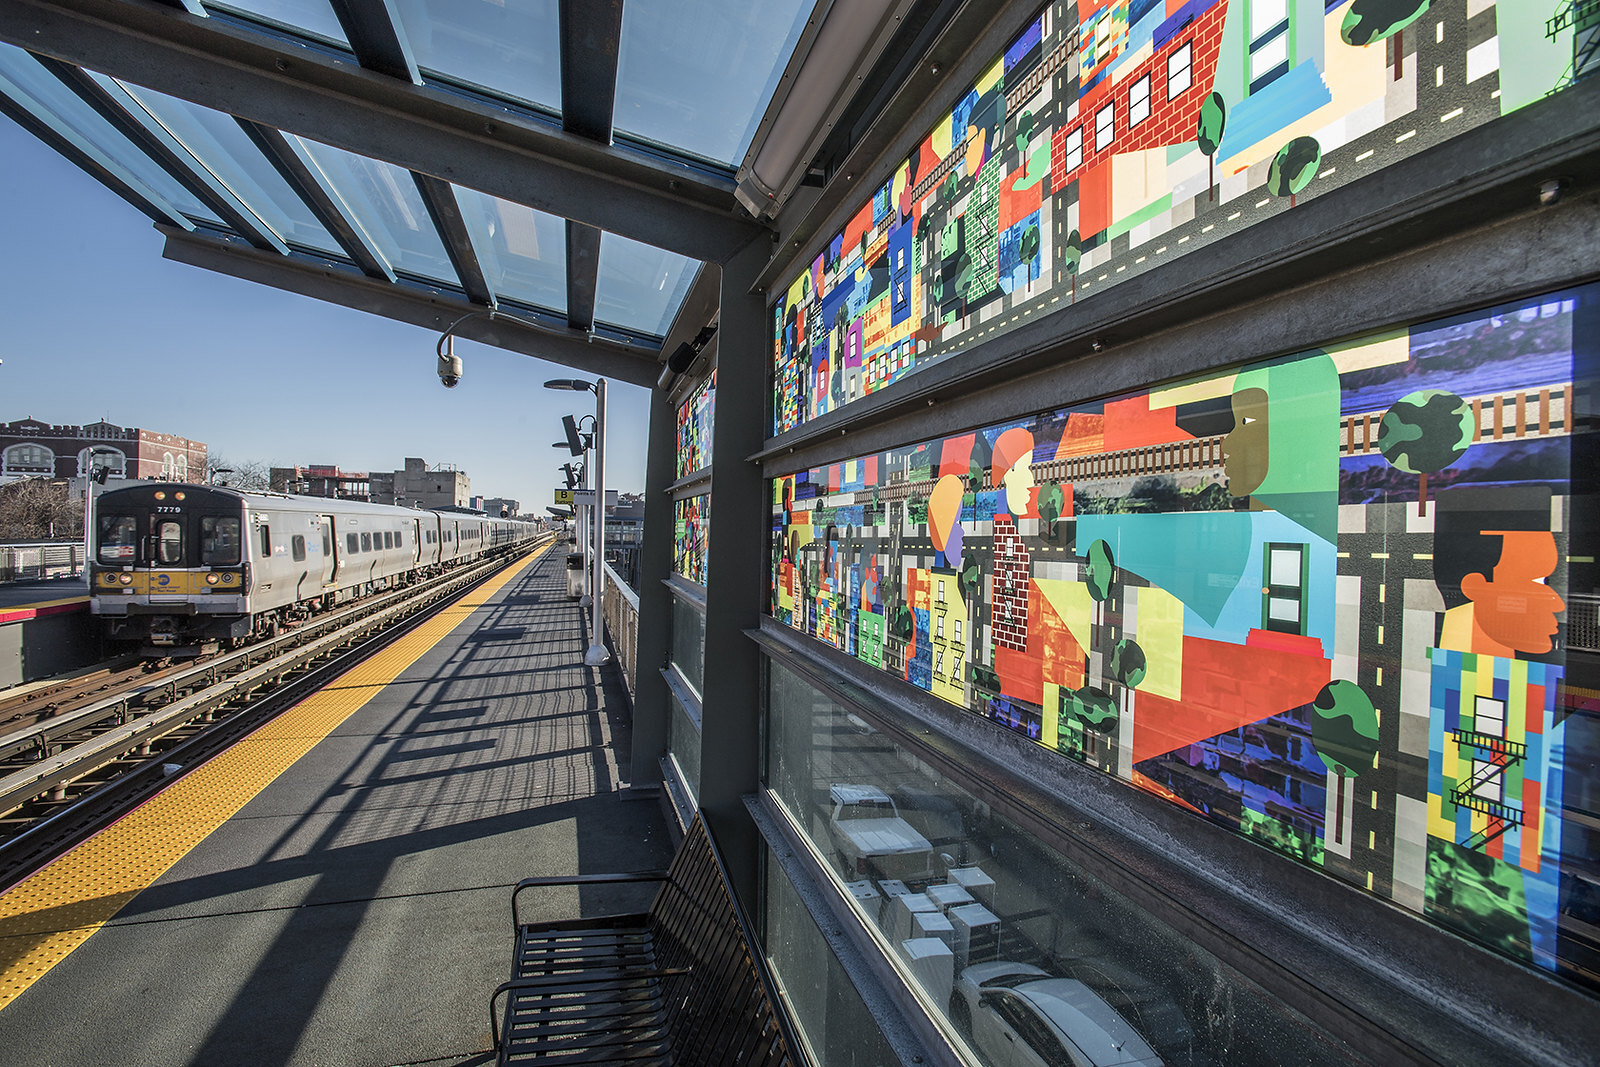 A train station at Nostrand Avenue, with a multicolored glass mosaic on the platform. 